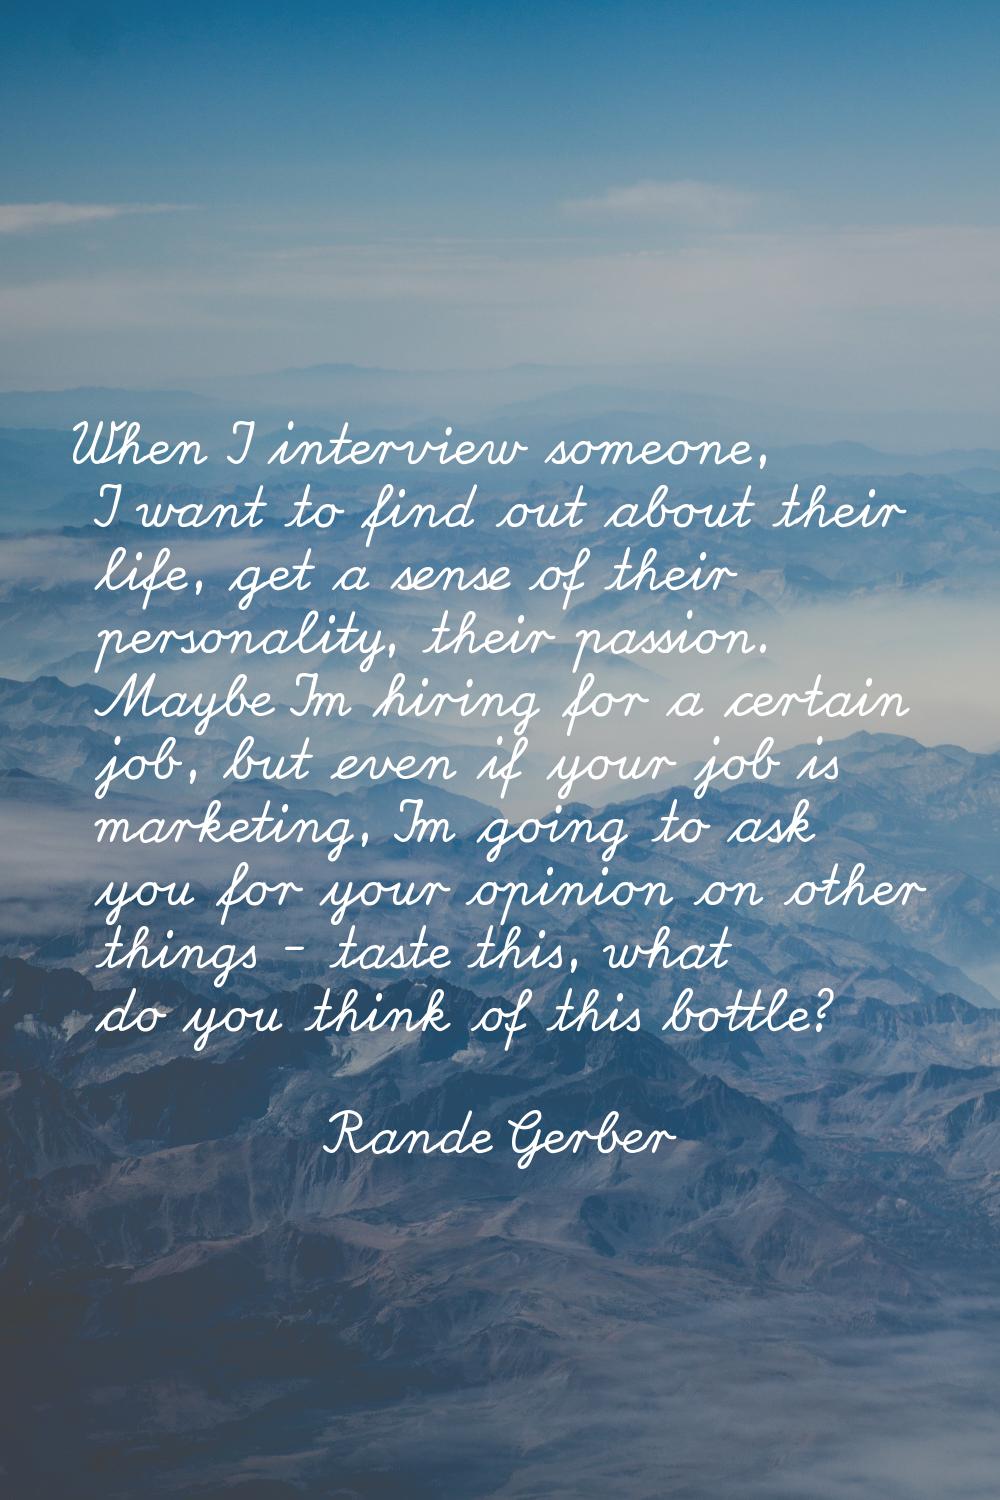 When I interview someone, I want to find out about their life, get a sense of their personality, th